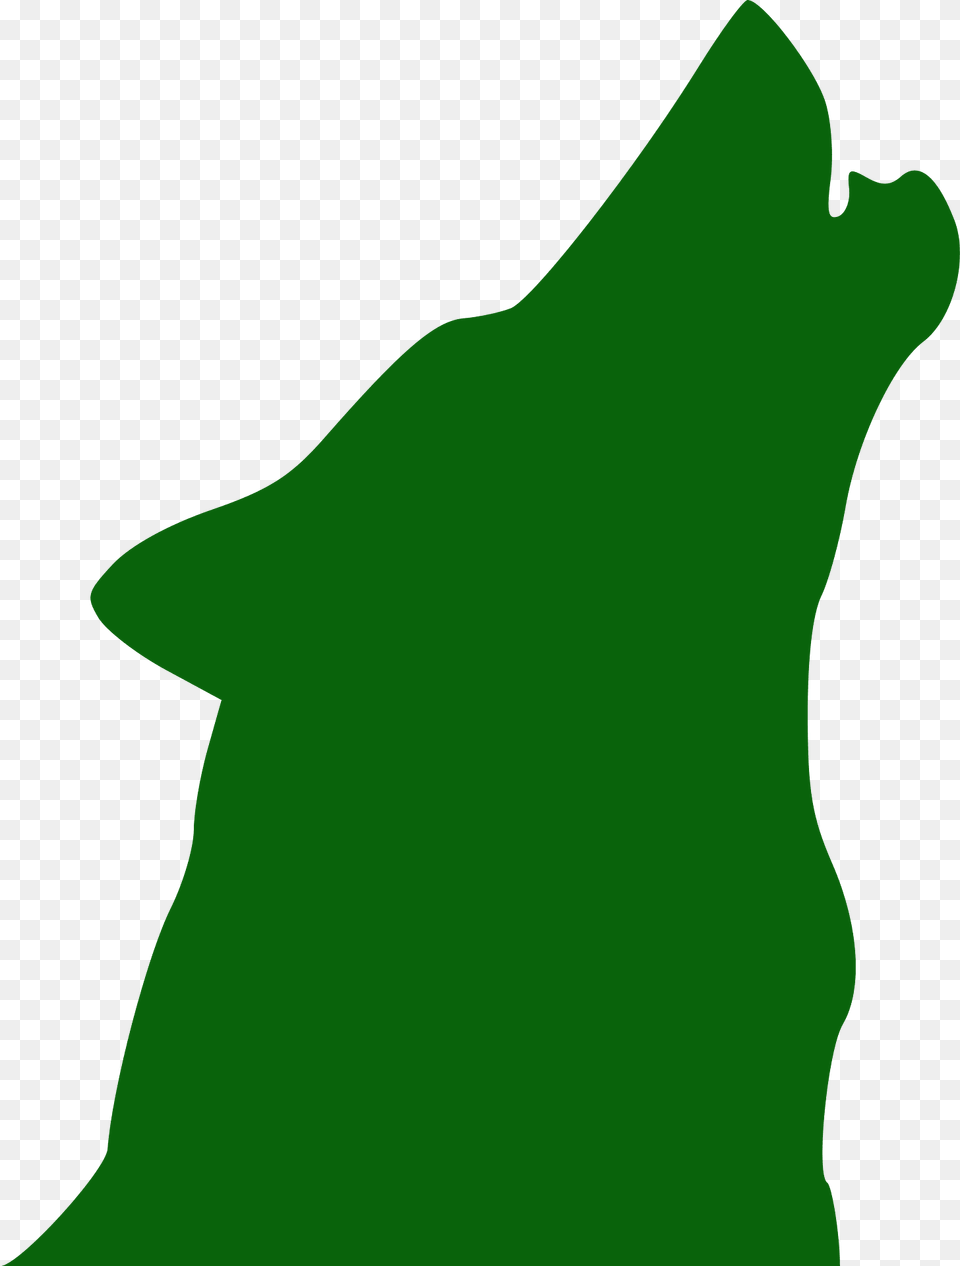 The Head Of A Wolf Howling Silhouette, Green, Leaf, Plant, Animal Png Image